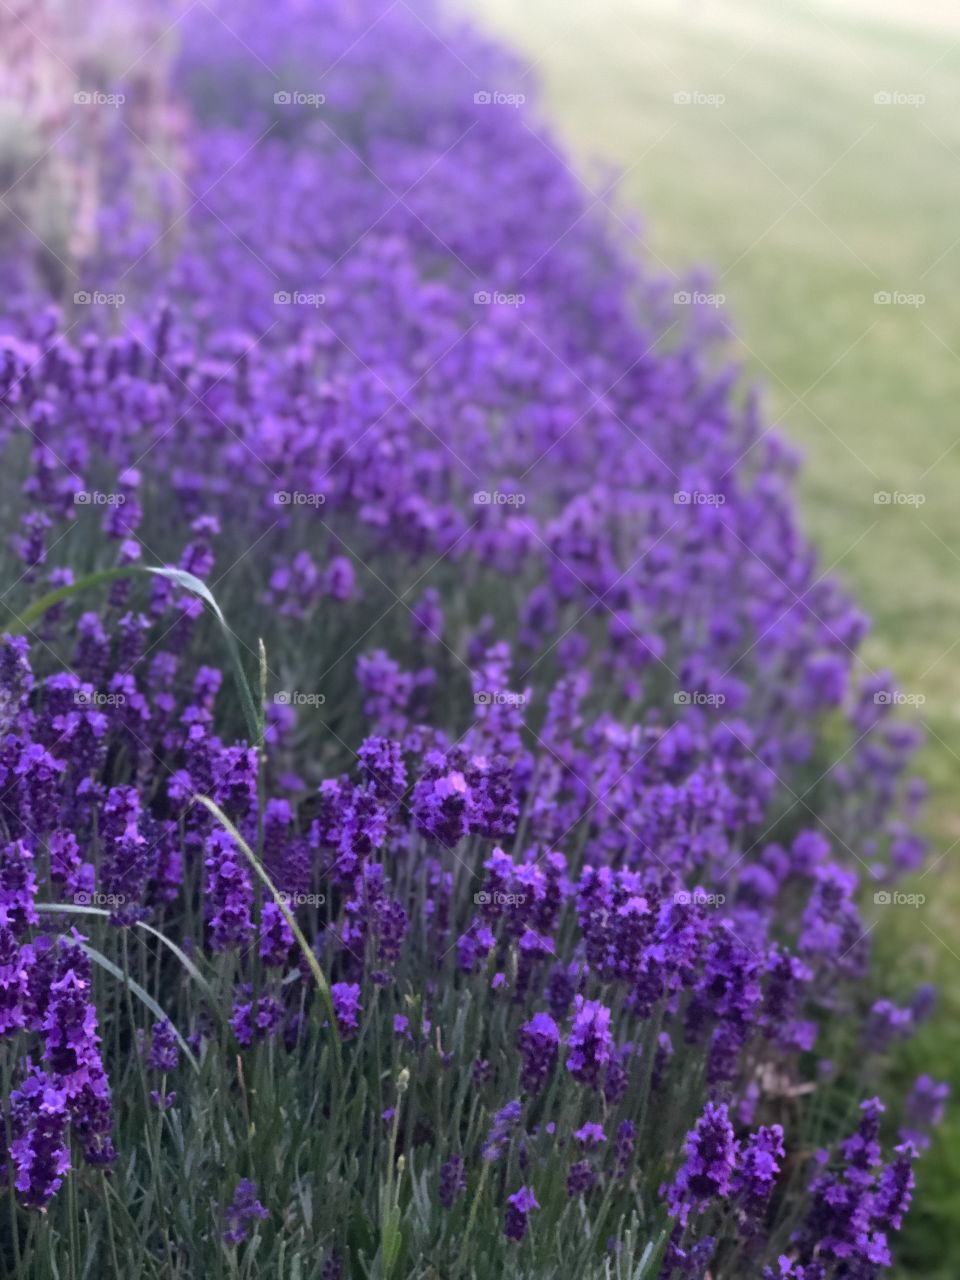 Lavenders blossoming